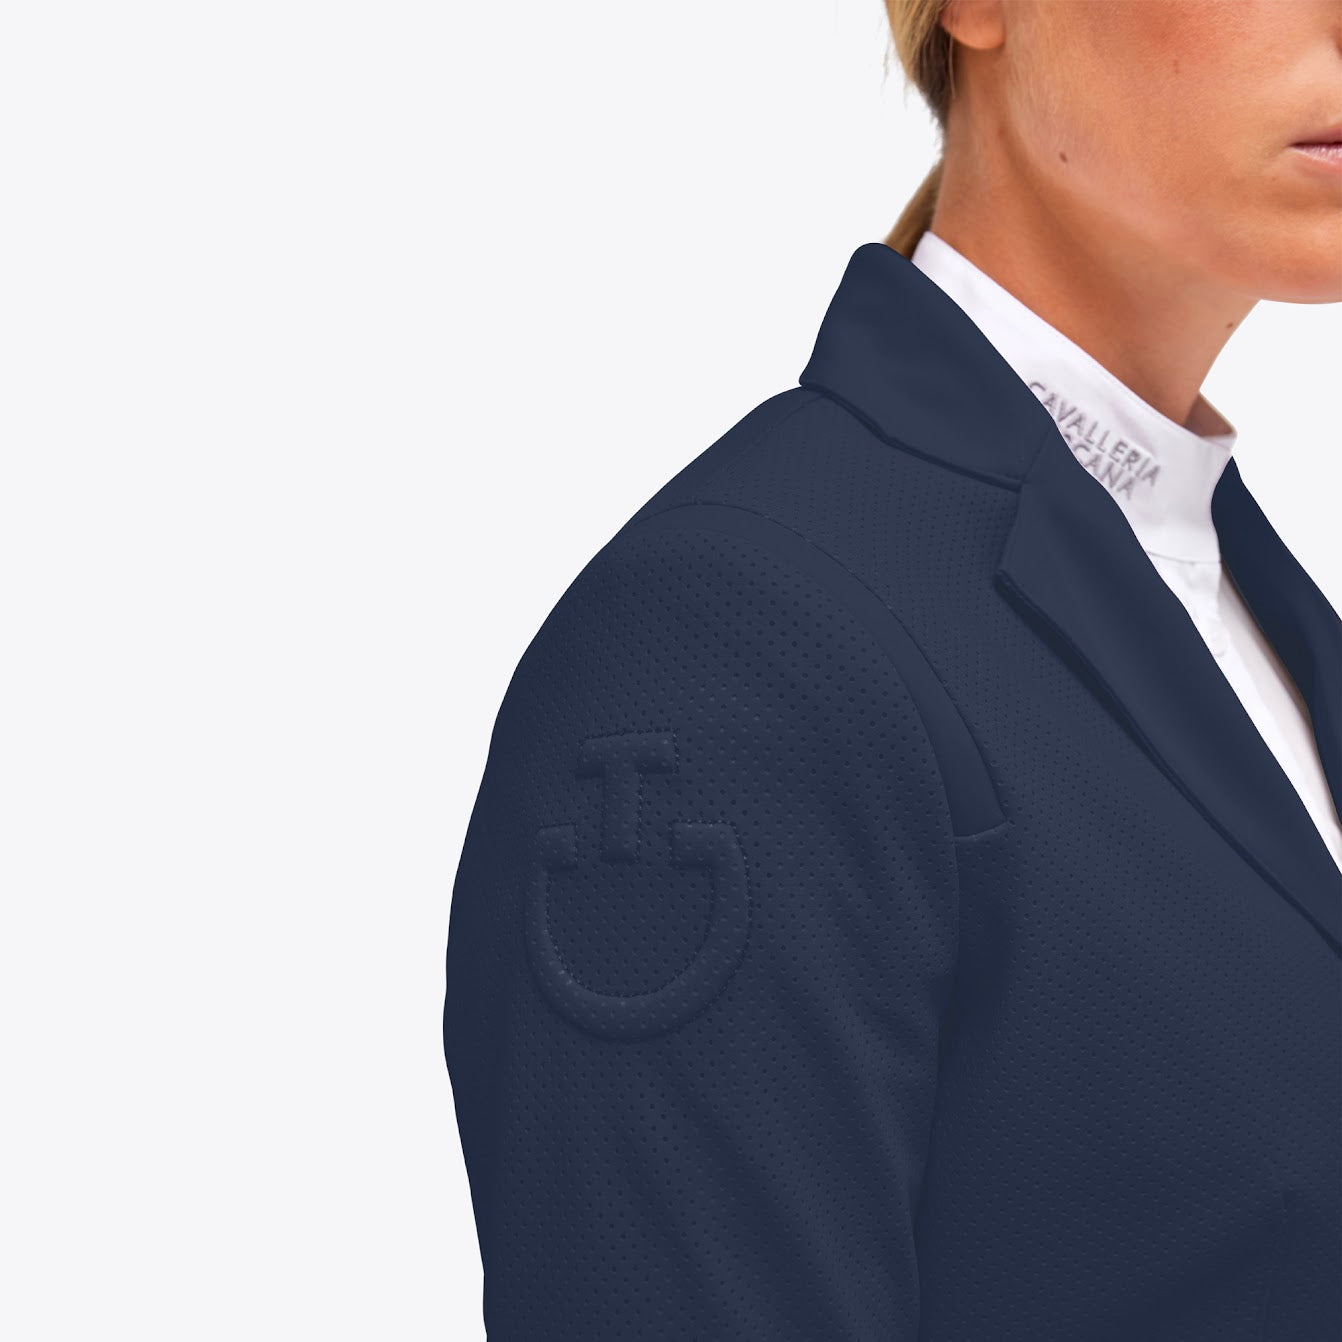 The Cavalleria Toscana All Over Perforated Show Jacket in blue. The perforation offers breathability and maximum movement when performing. Detailing over the shoulders gives a slimming effect with the CT logo on the sleeve. 